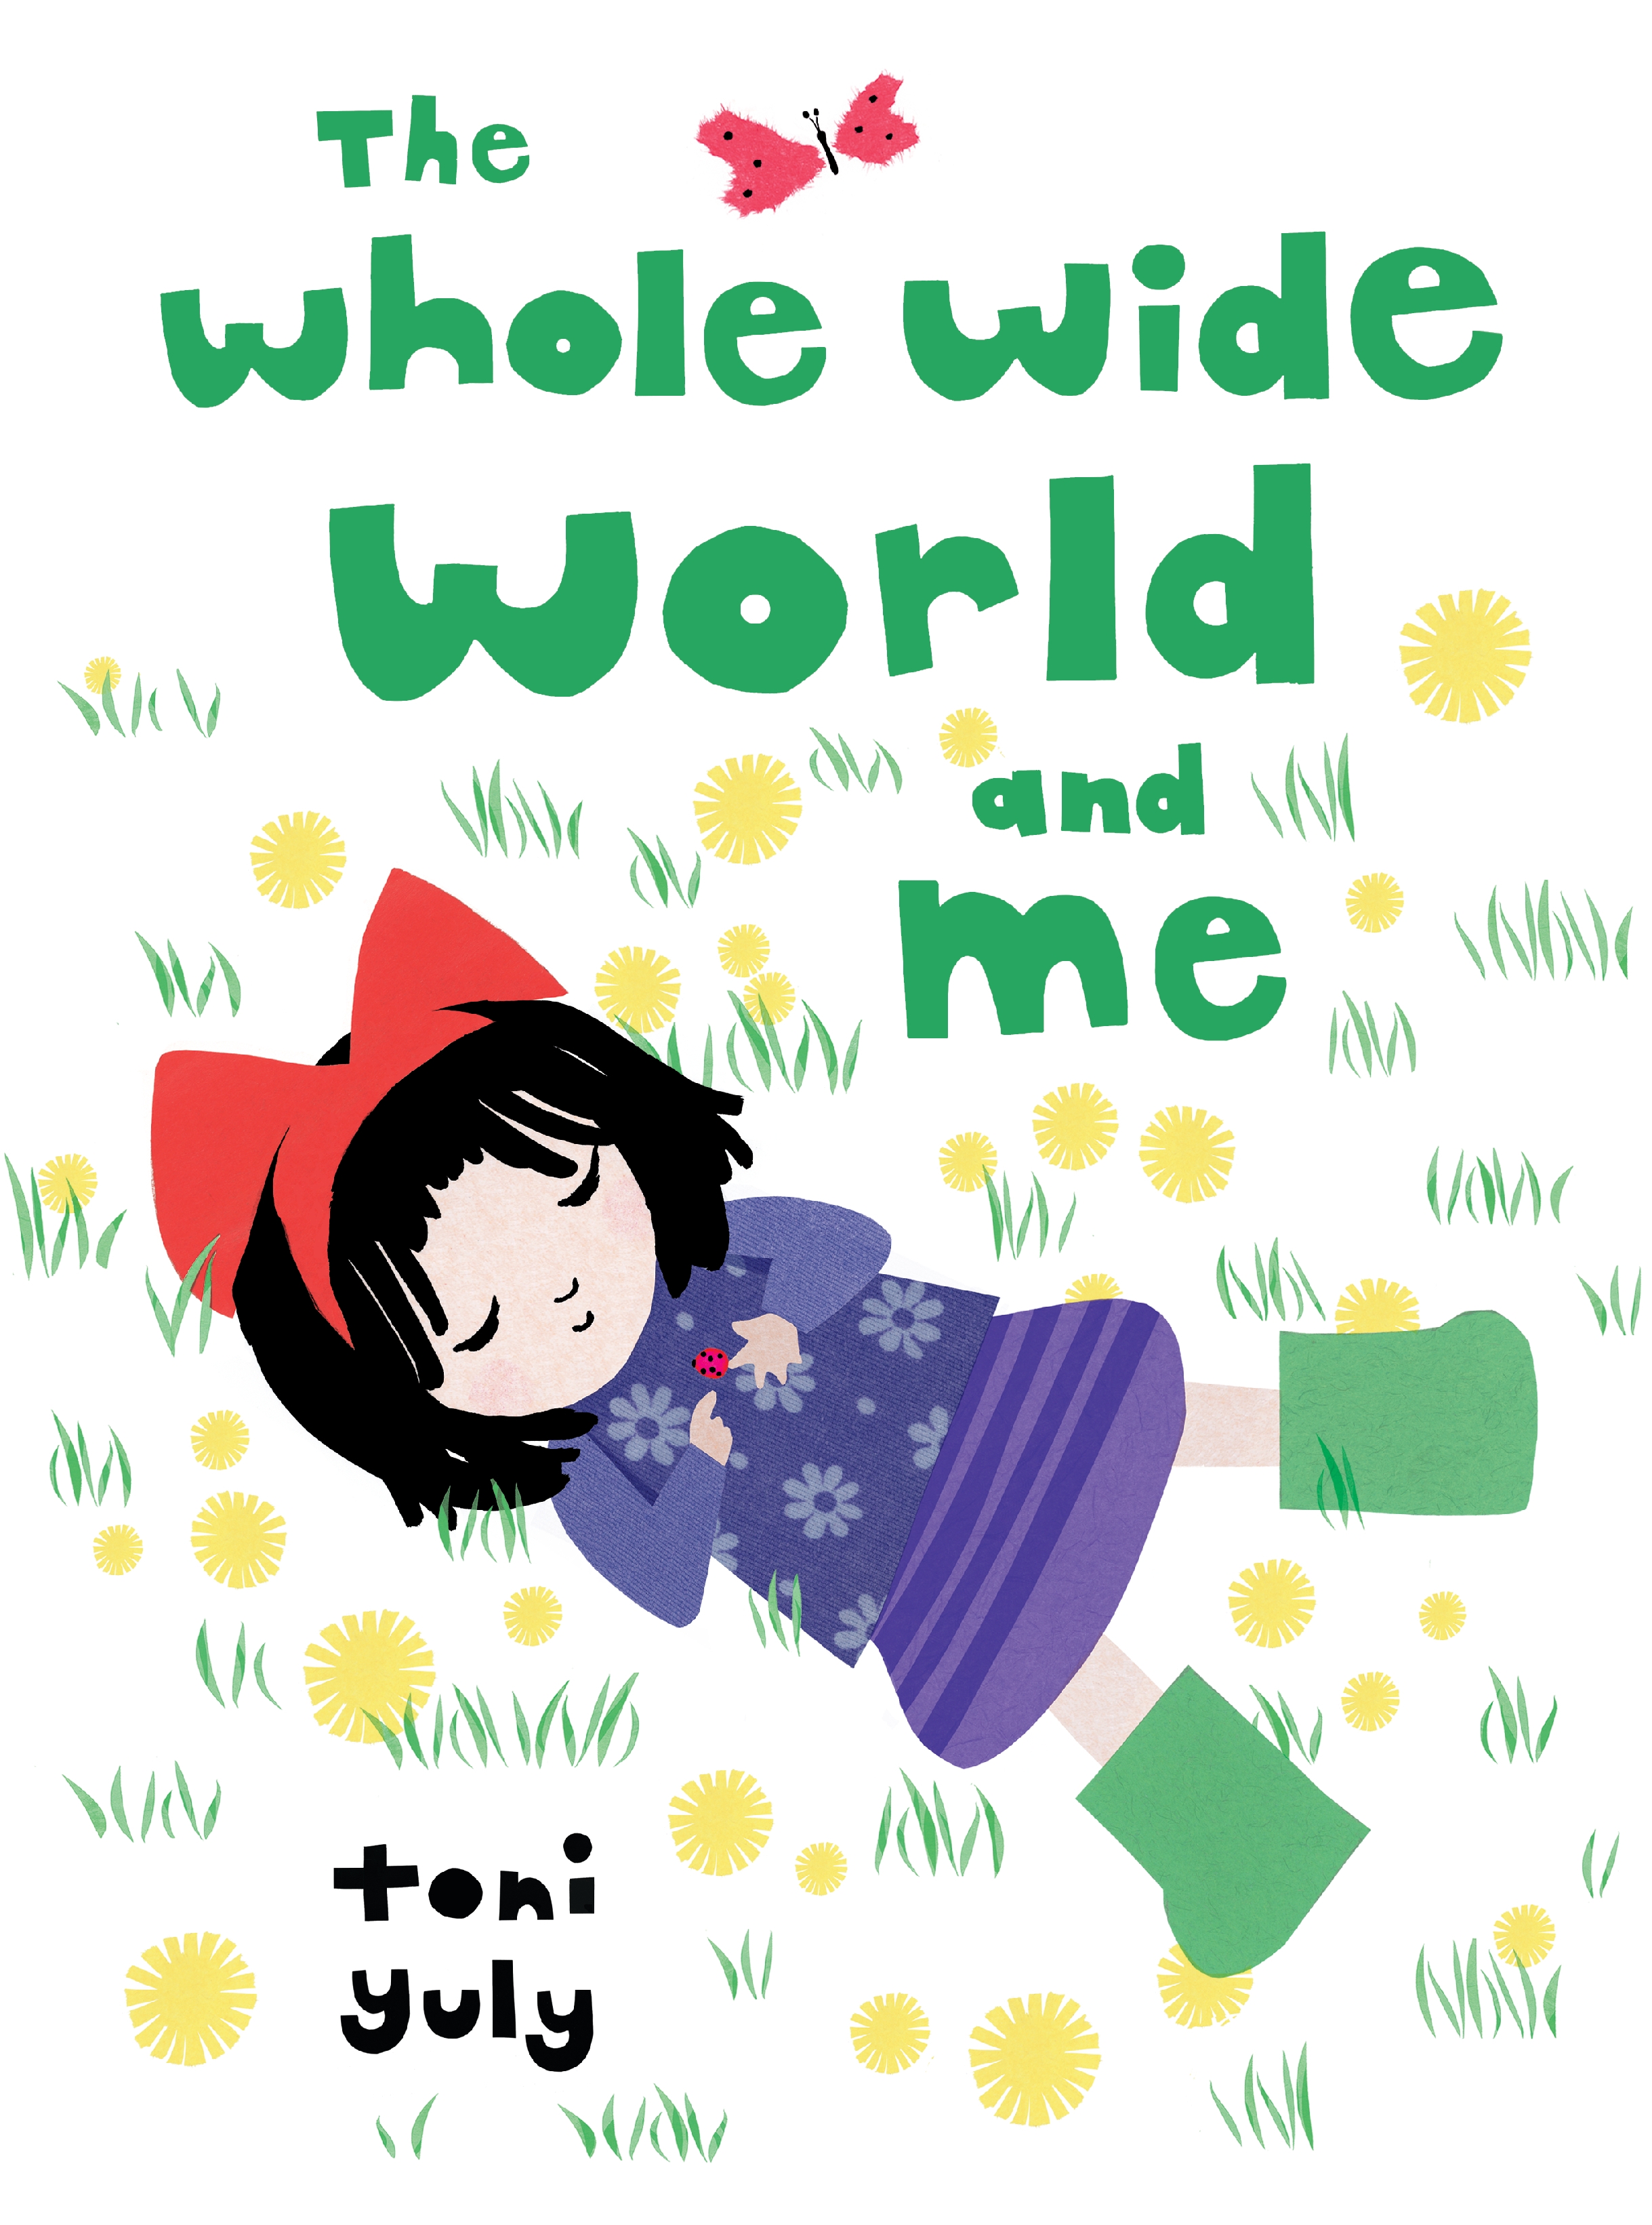 Yuly, Toni 2019_02 WHOLE WIDE WORLD AND ME - PB - RLM LK (To Be Updated).jpg